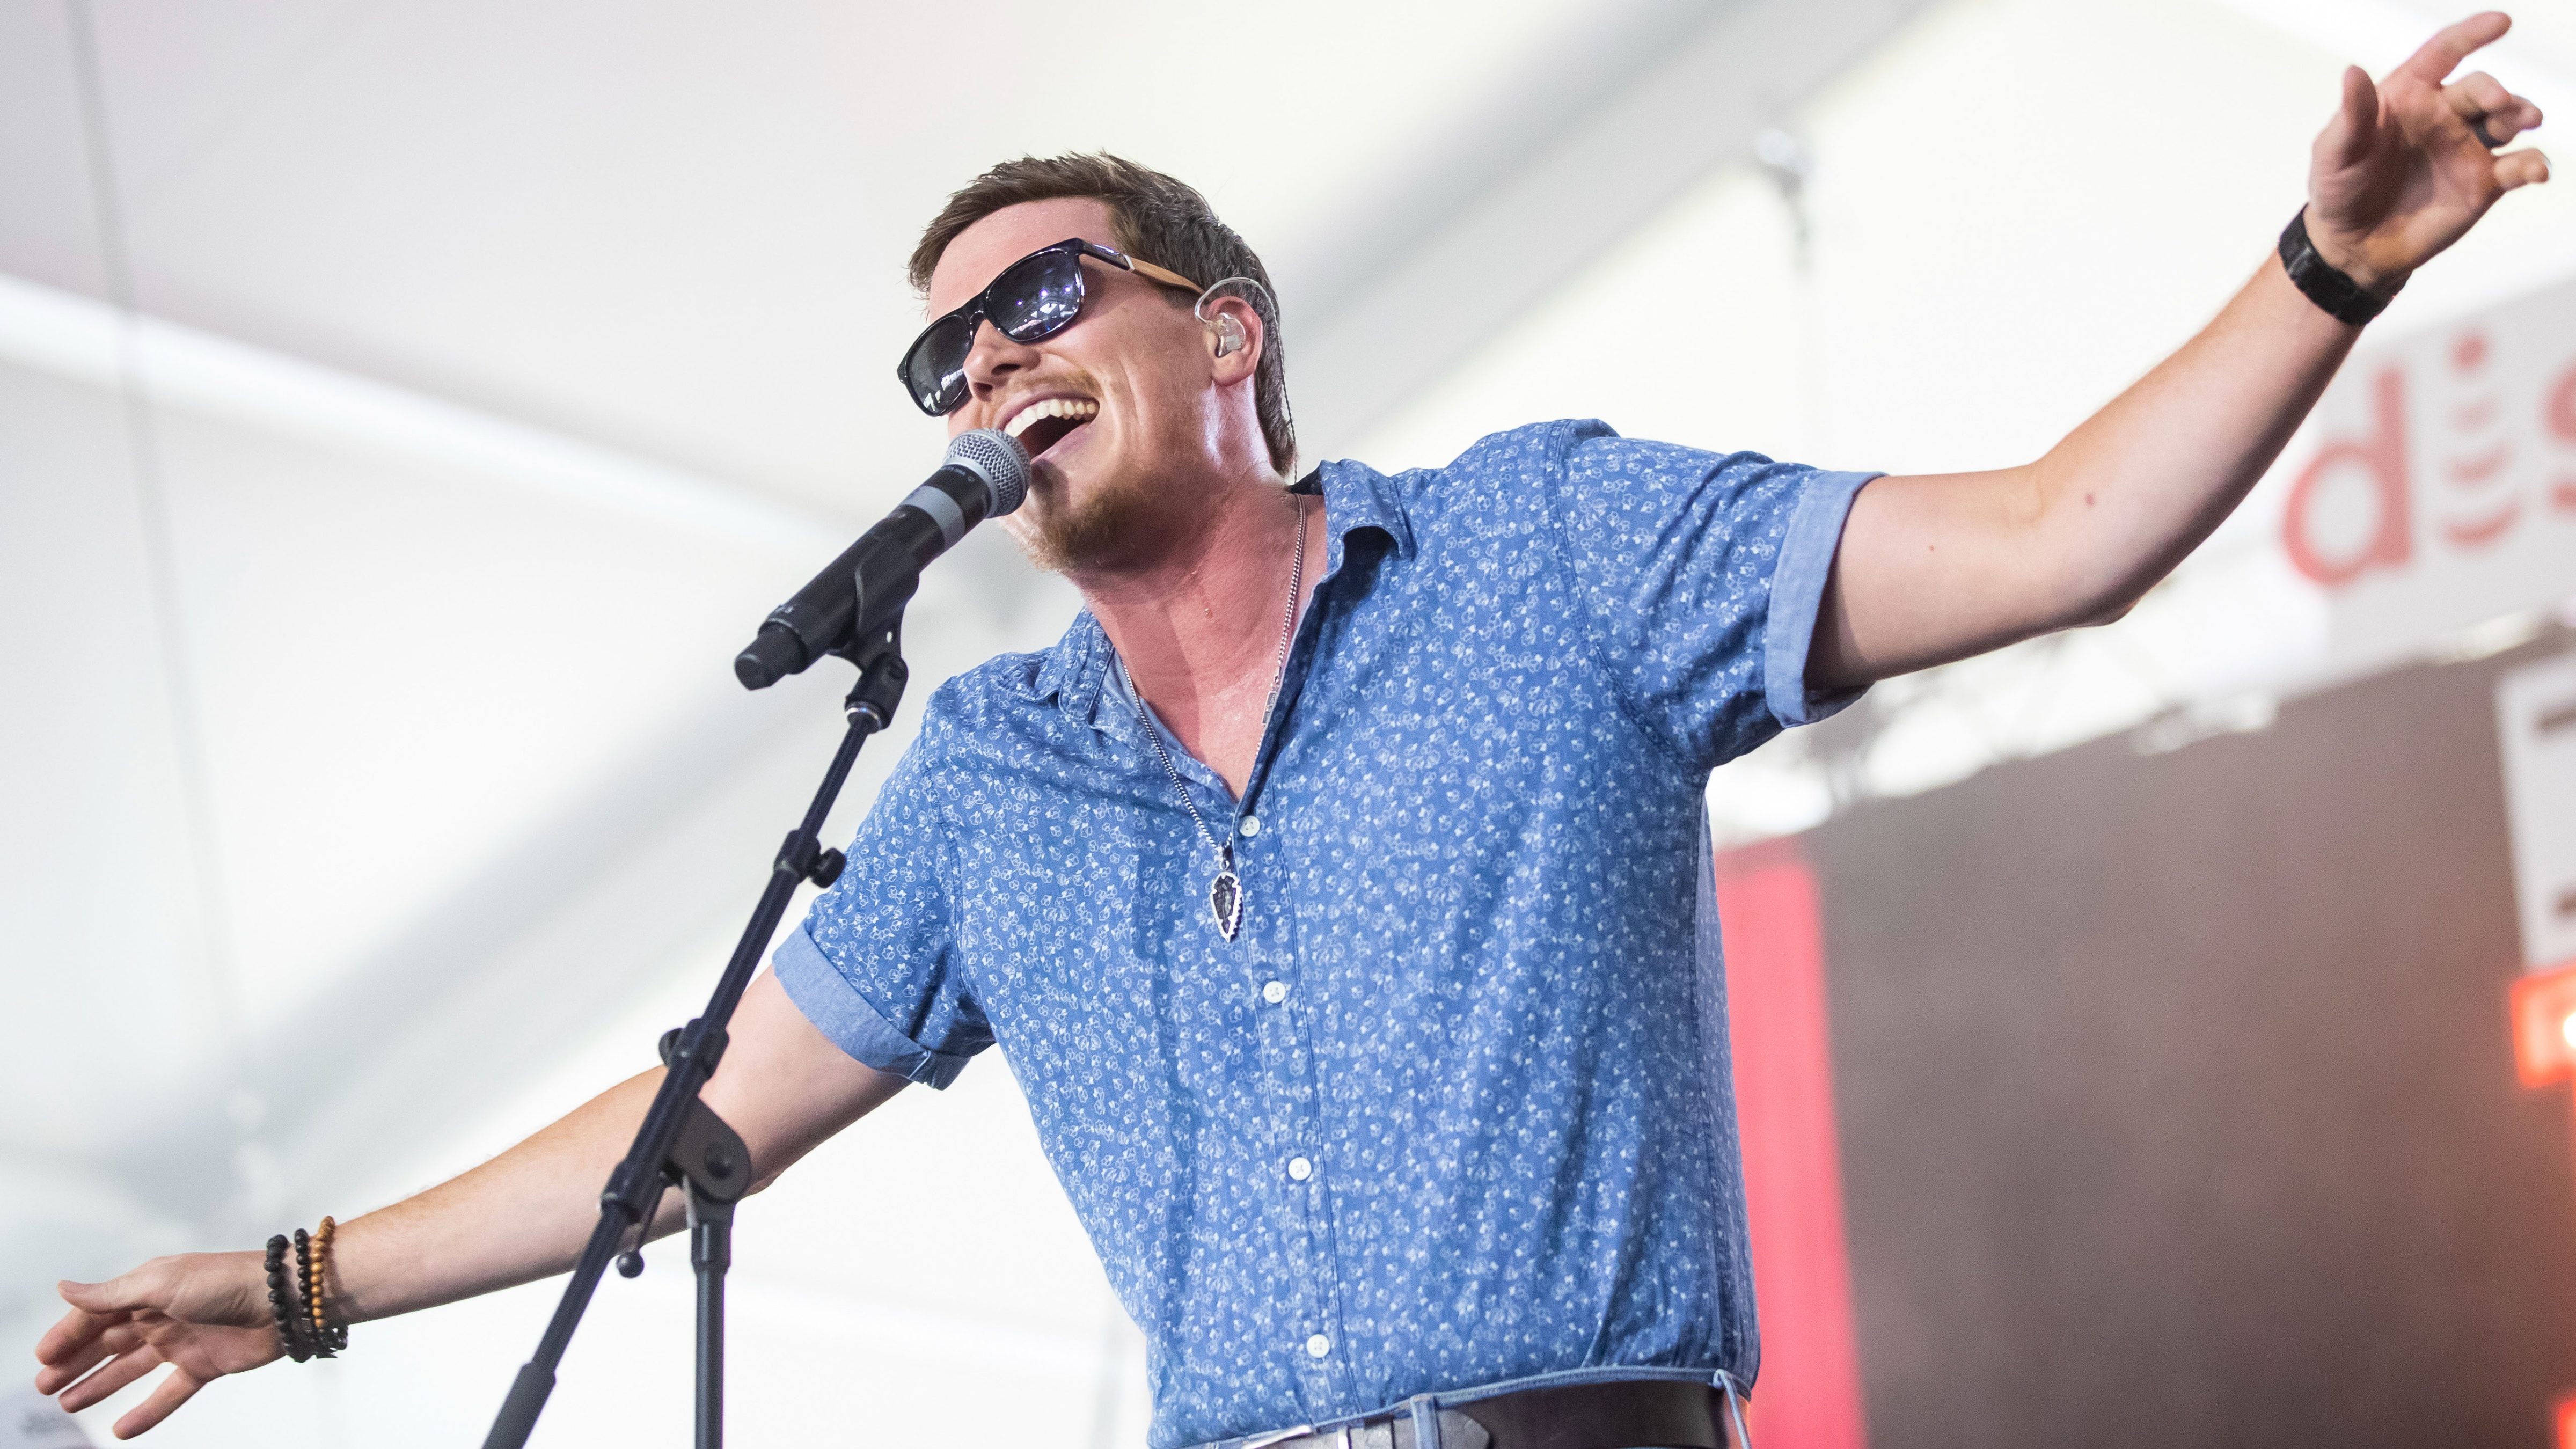 CHICAGO, IL - JUN 22: George Birge of Waterloo Revival performs at Lakeshake Music Festival on June 22, 2019 in Chicago, Illinois. 